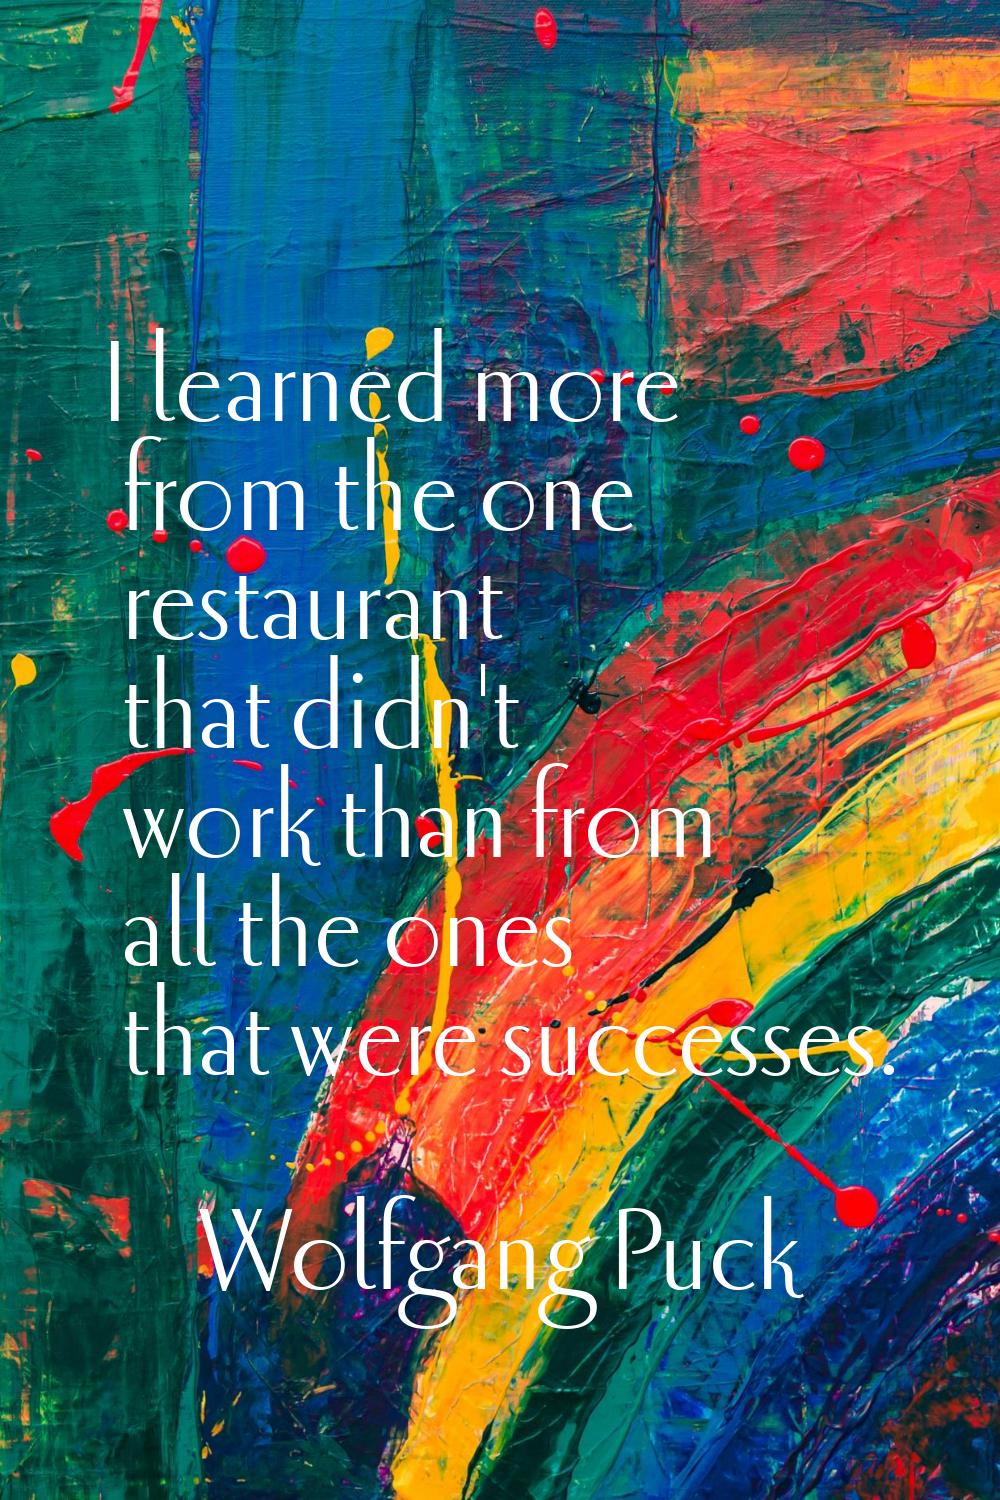 I learned more from the one restaurant that didn't work than from all the ones that were successes.